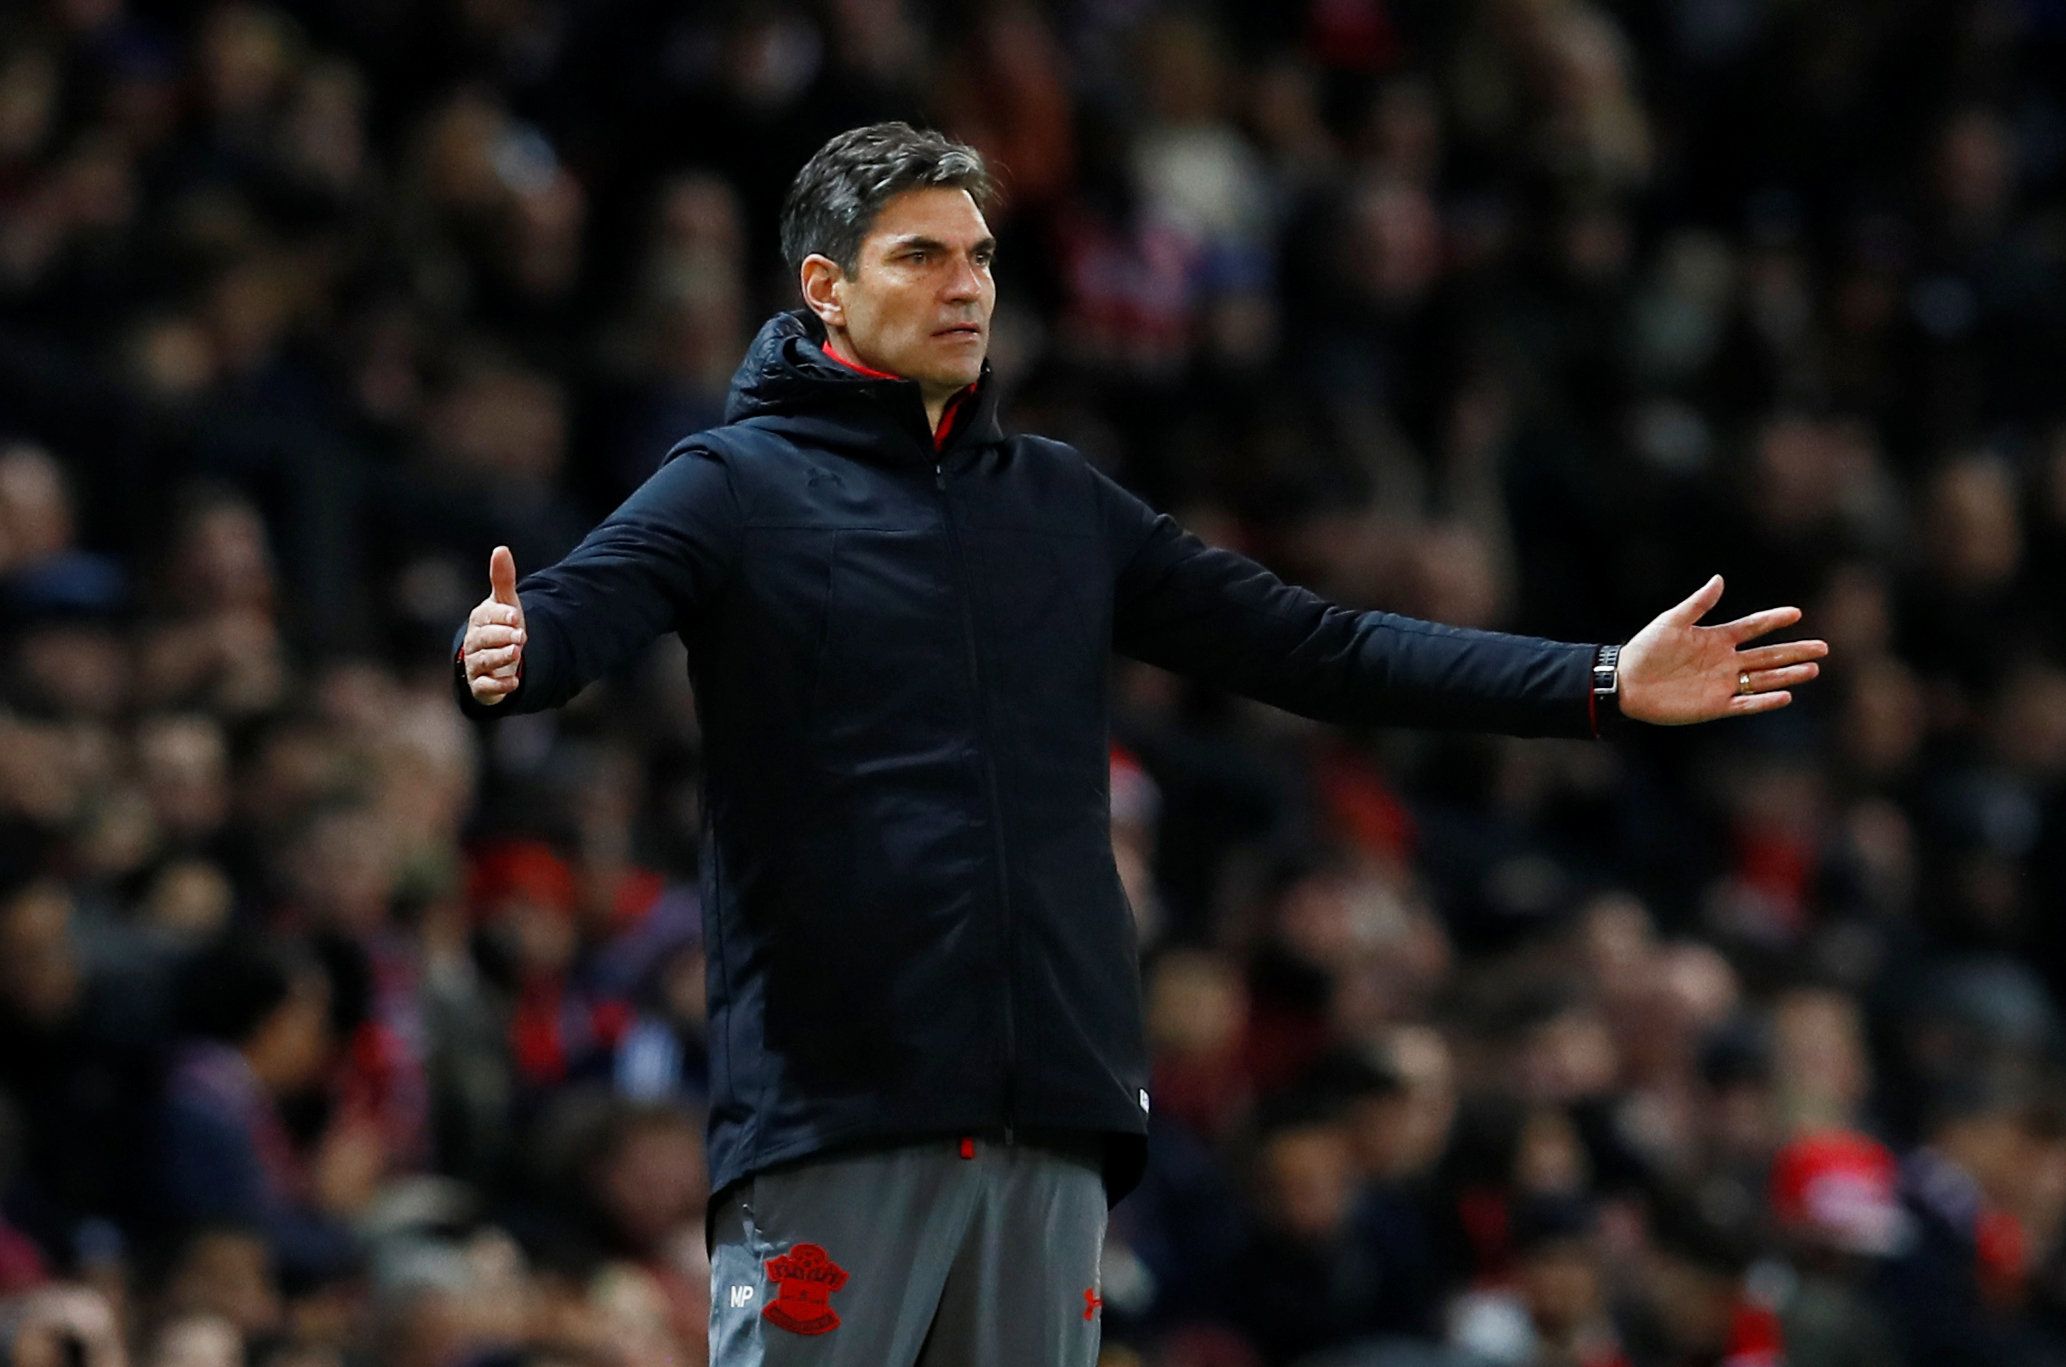 Soccer Football - Premier League - Manchester United vs Southampton - Old Trafford, Manchester, Britain - December 30, 2017   Southampton manager Mauricio Pellegrino              Action Images via Reuters/Jason Cairnduff    EDITORIAL USE ONLY. No use with unauthorized audio, video, data, fixture lists, club/league logos or 